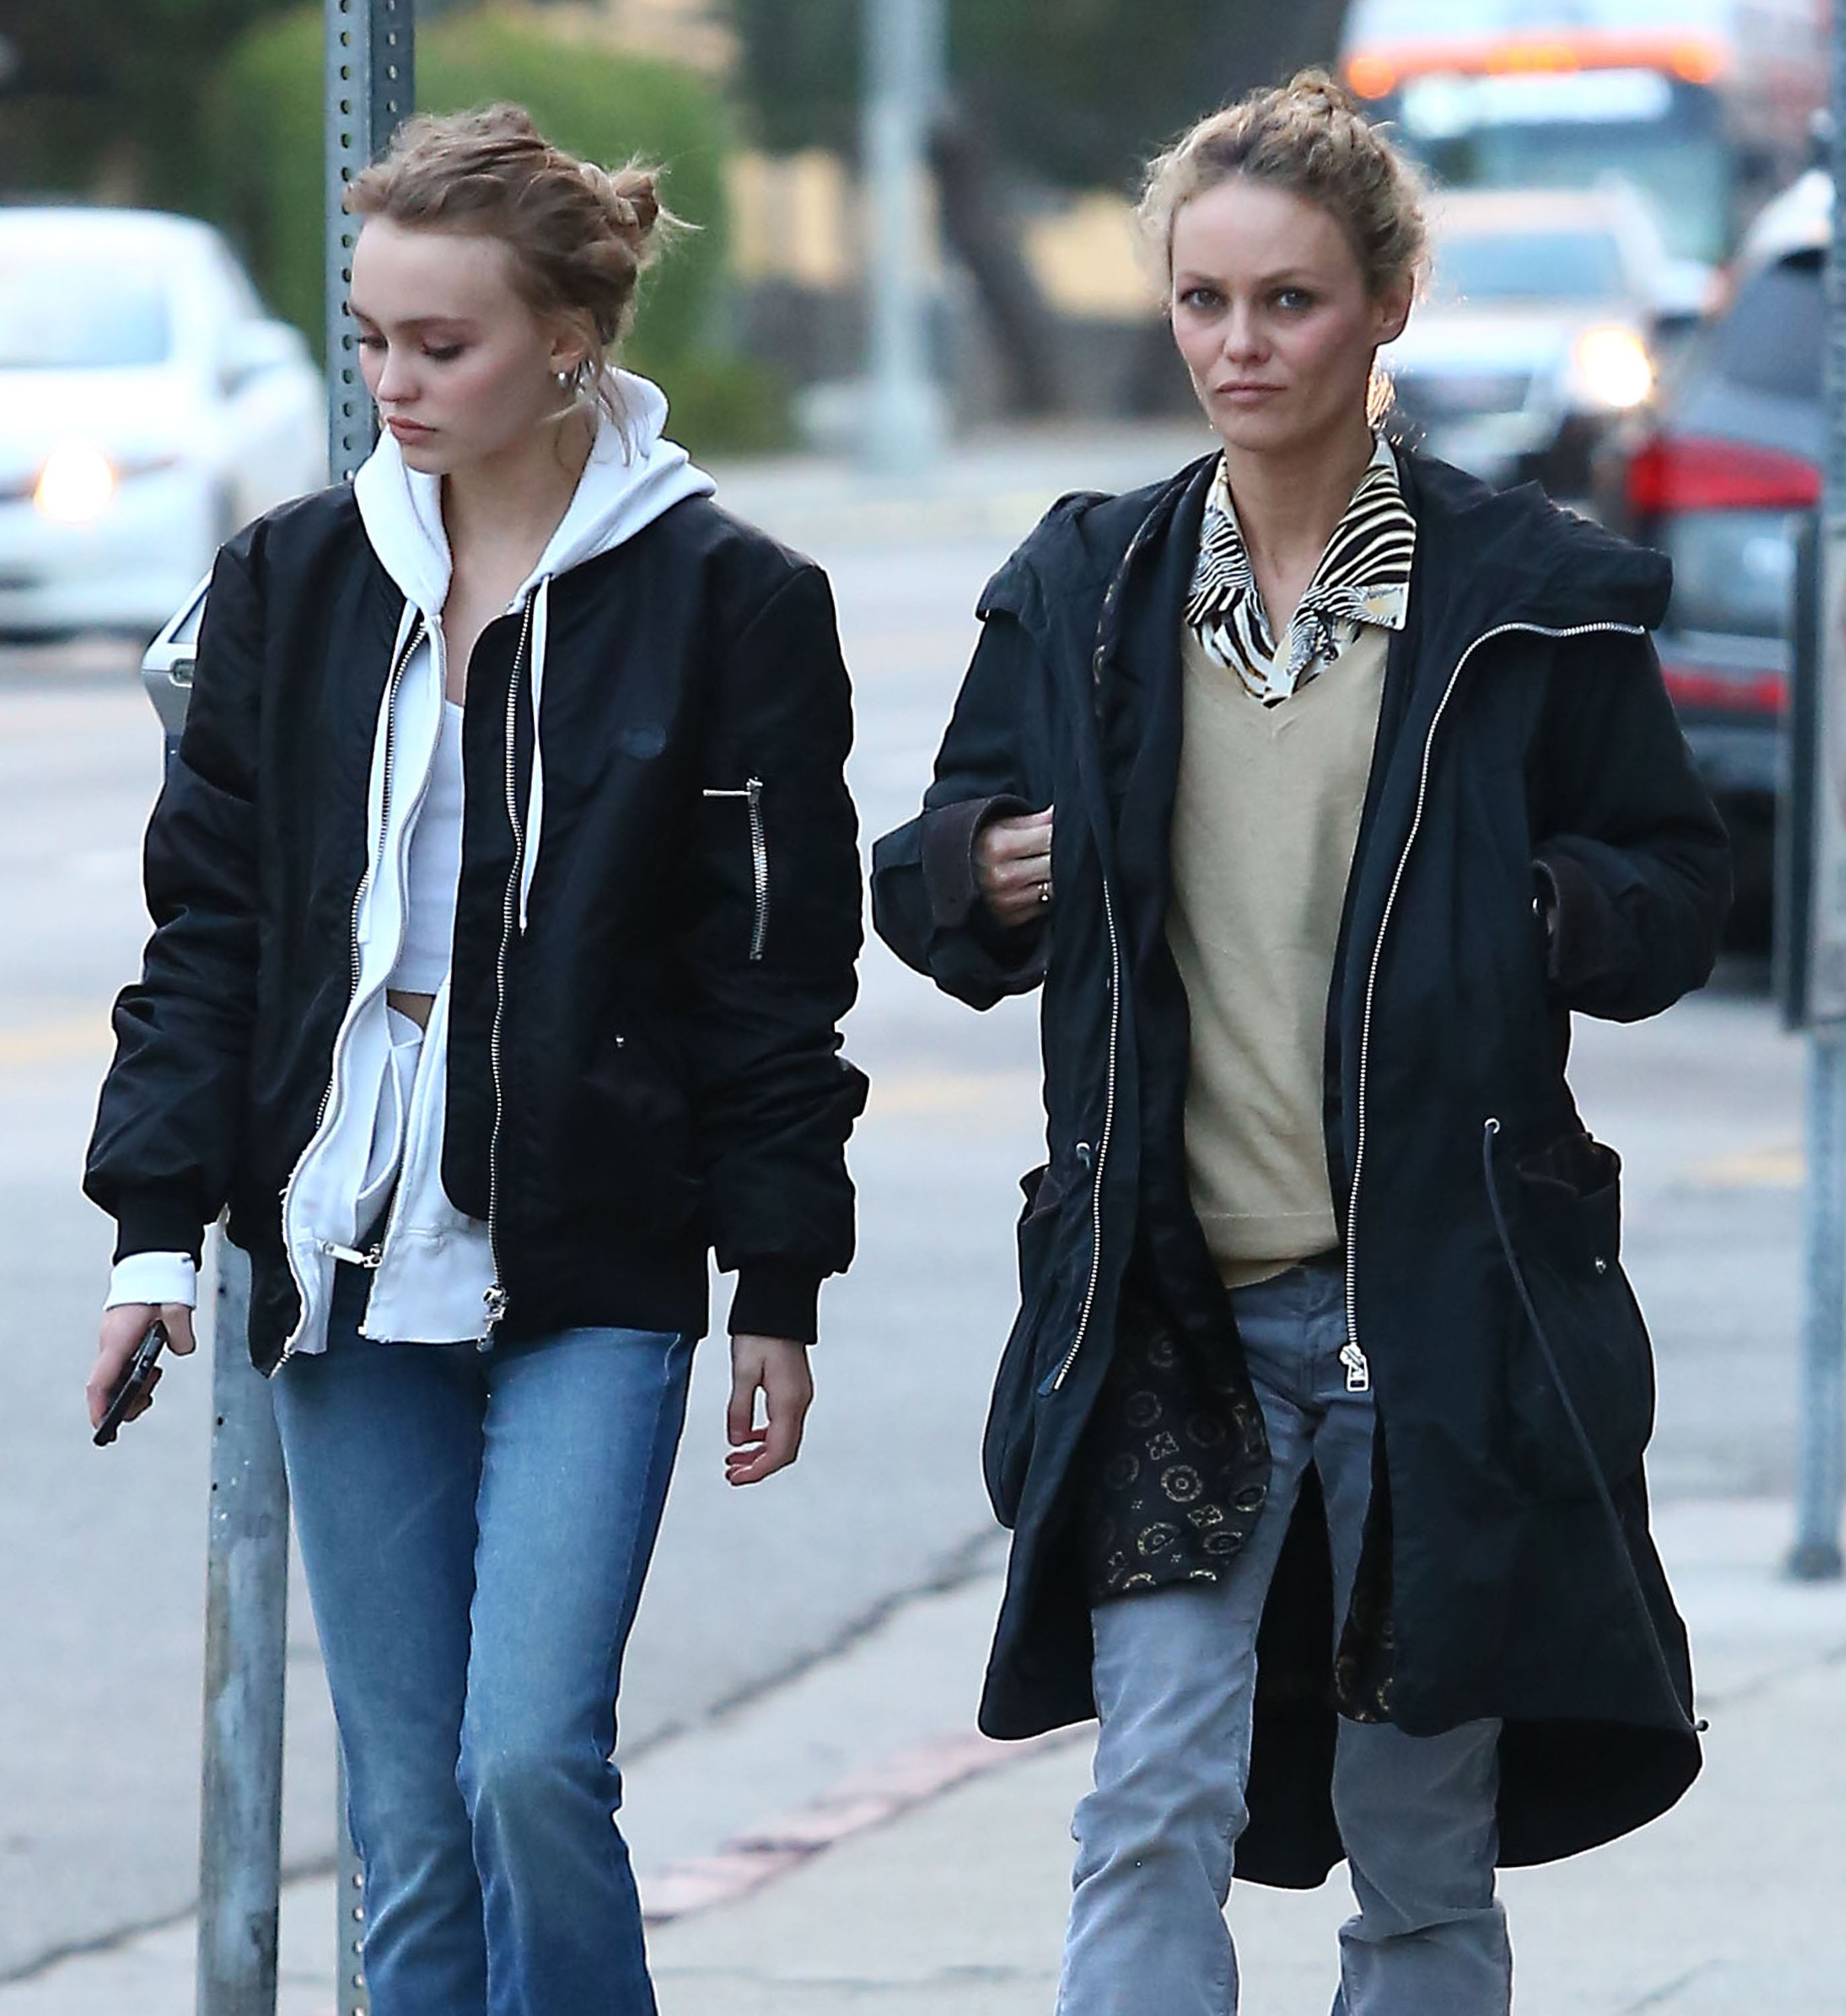 Vanessa Paradis and Lily-Rose Depp Shopping in LA 2016